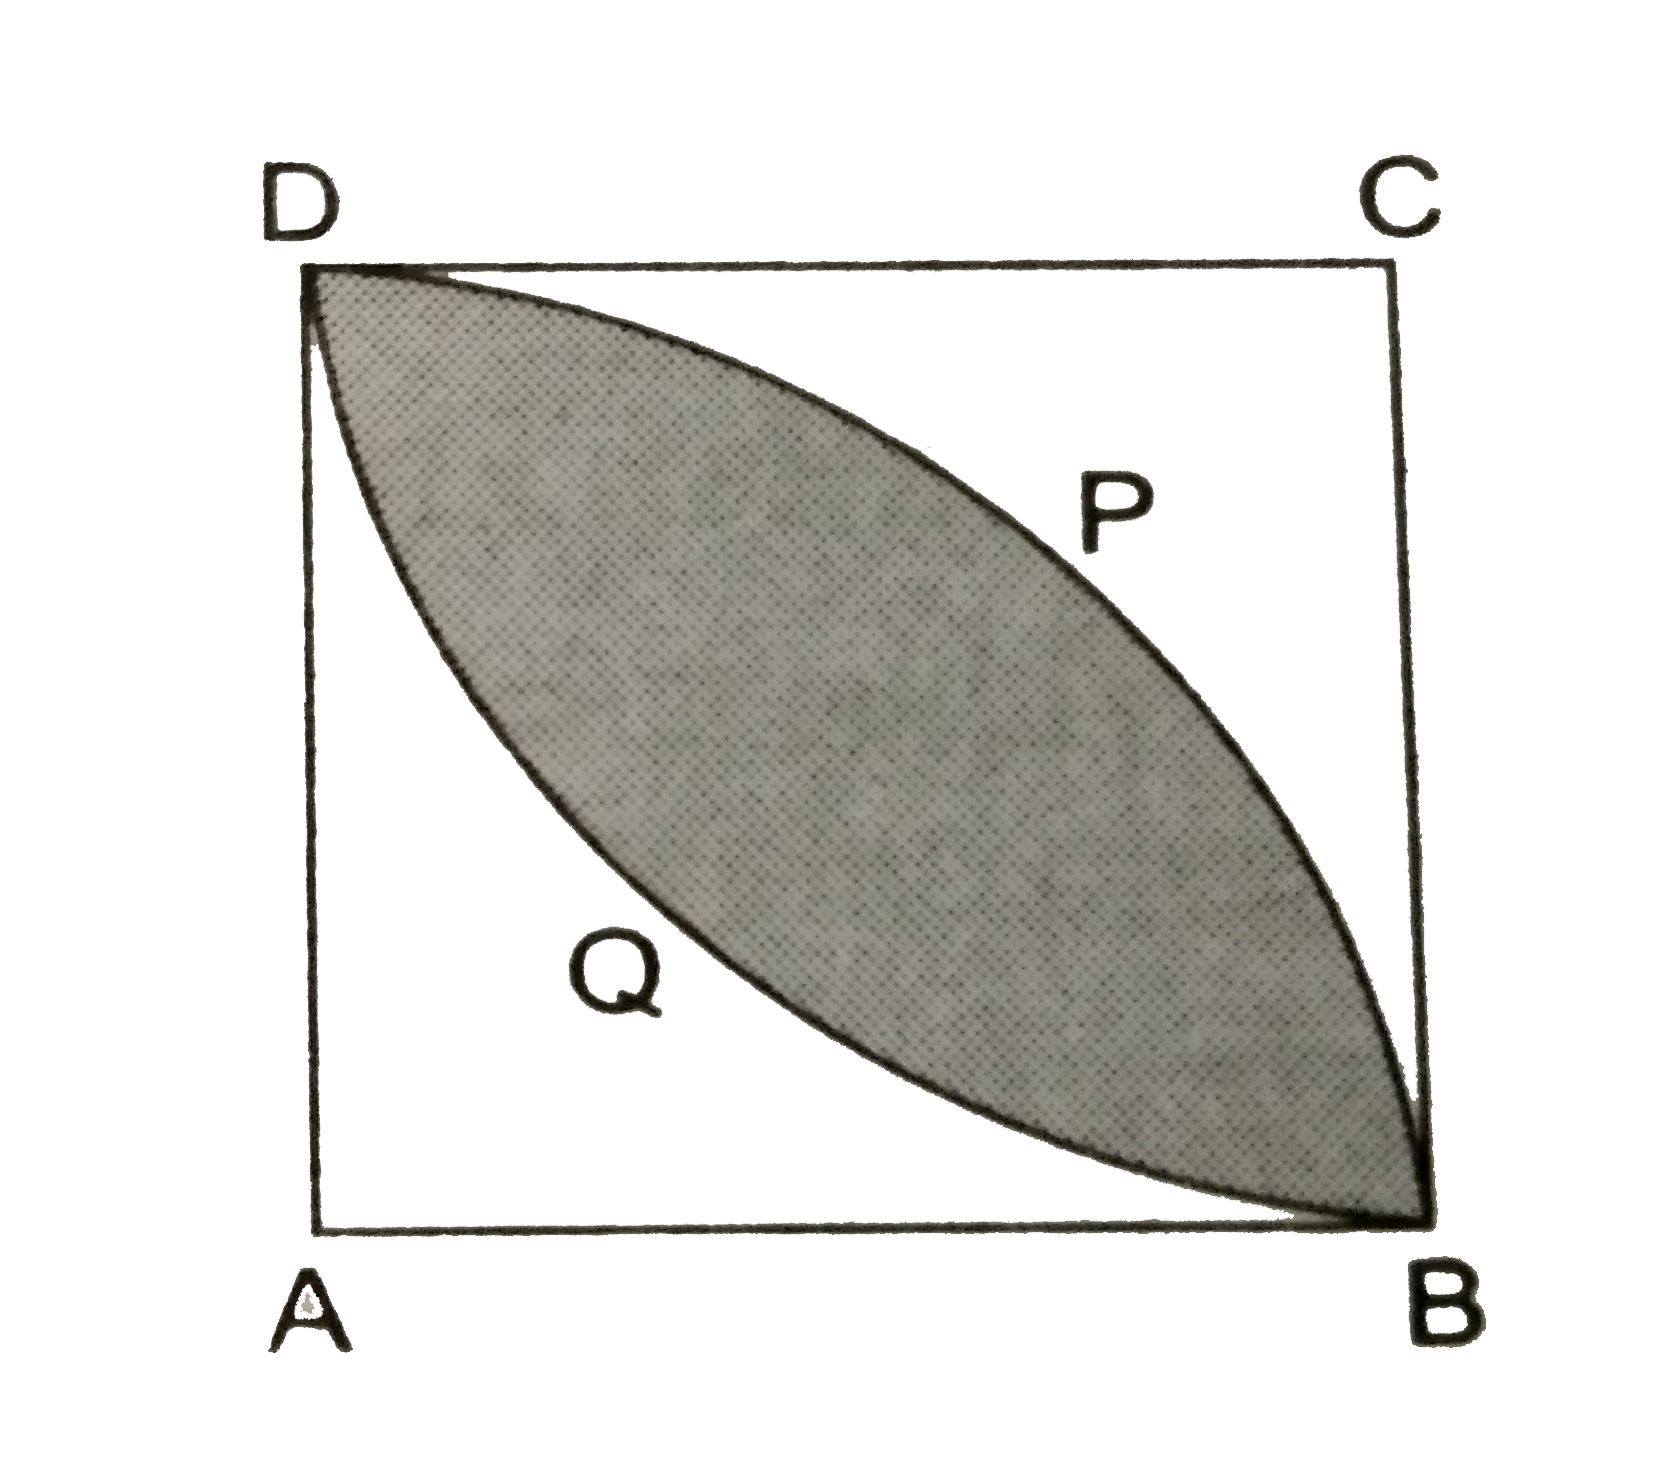 In the given figure, ABCD is a square of side 7cm, DPBA and DQBC are quadrants of circles each of the radius 7 cm. Find the area of shaded region.